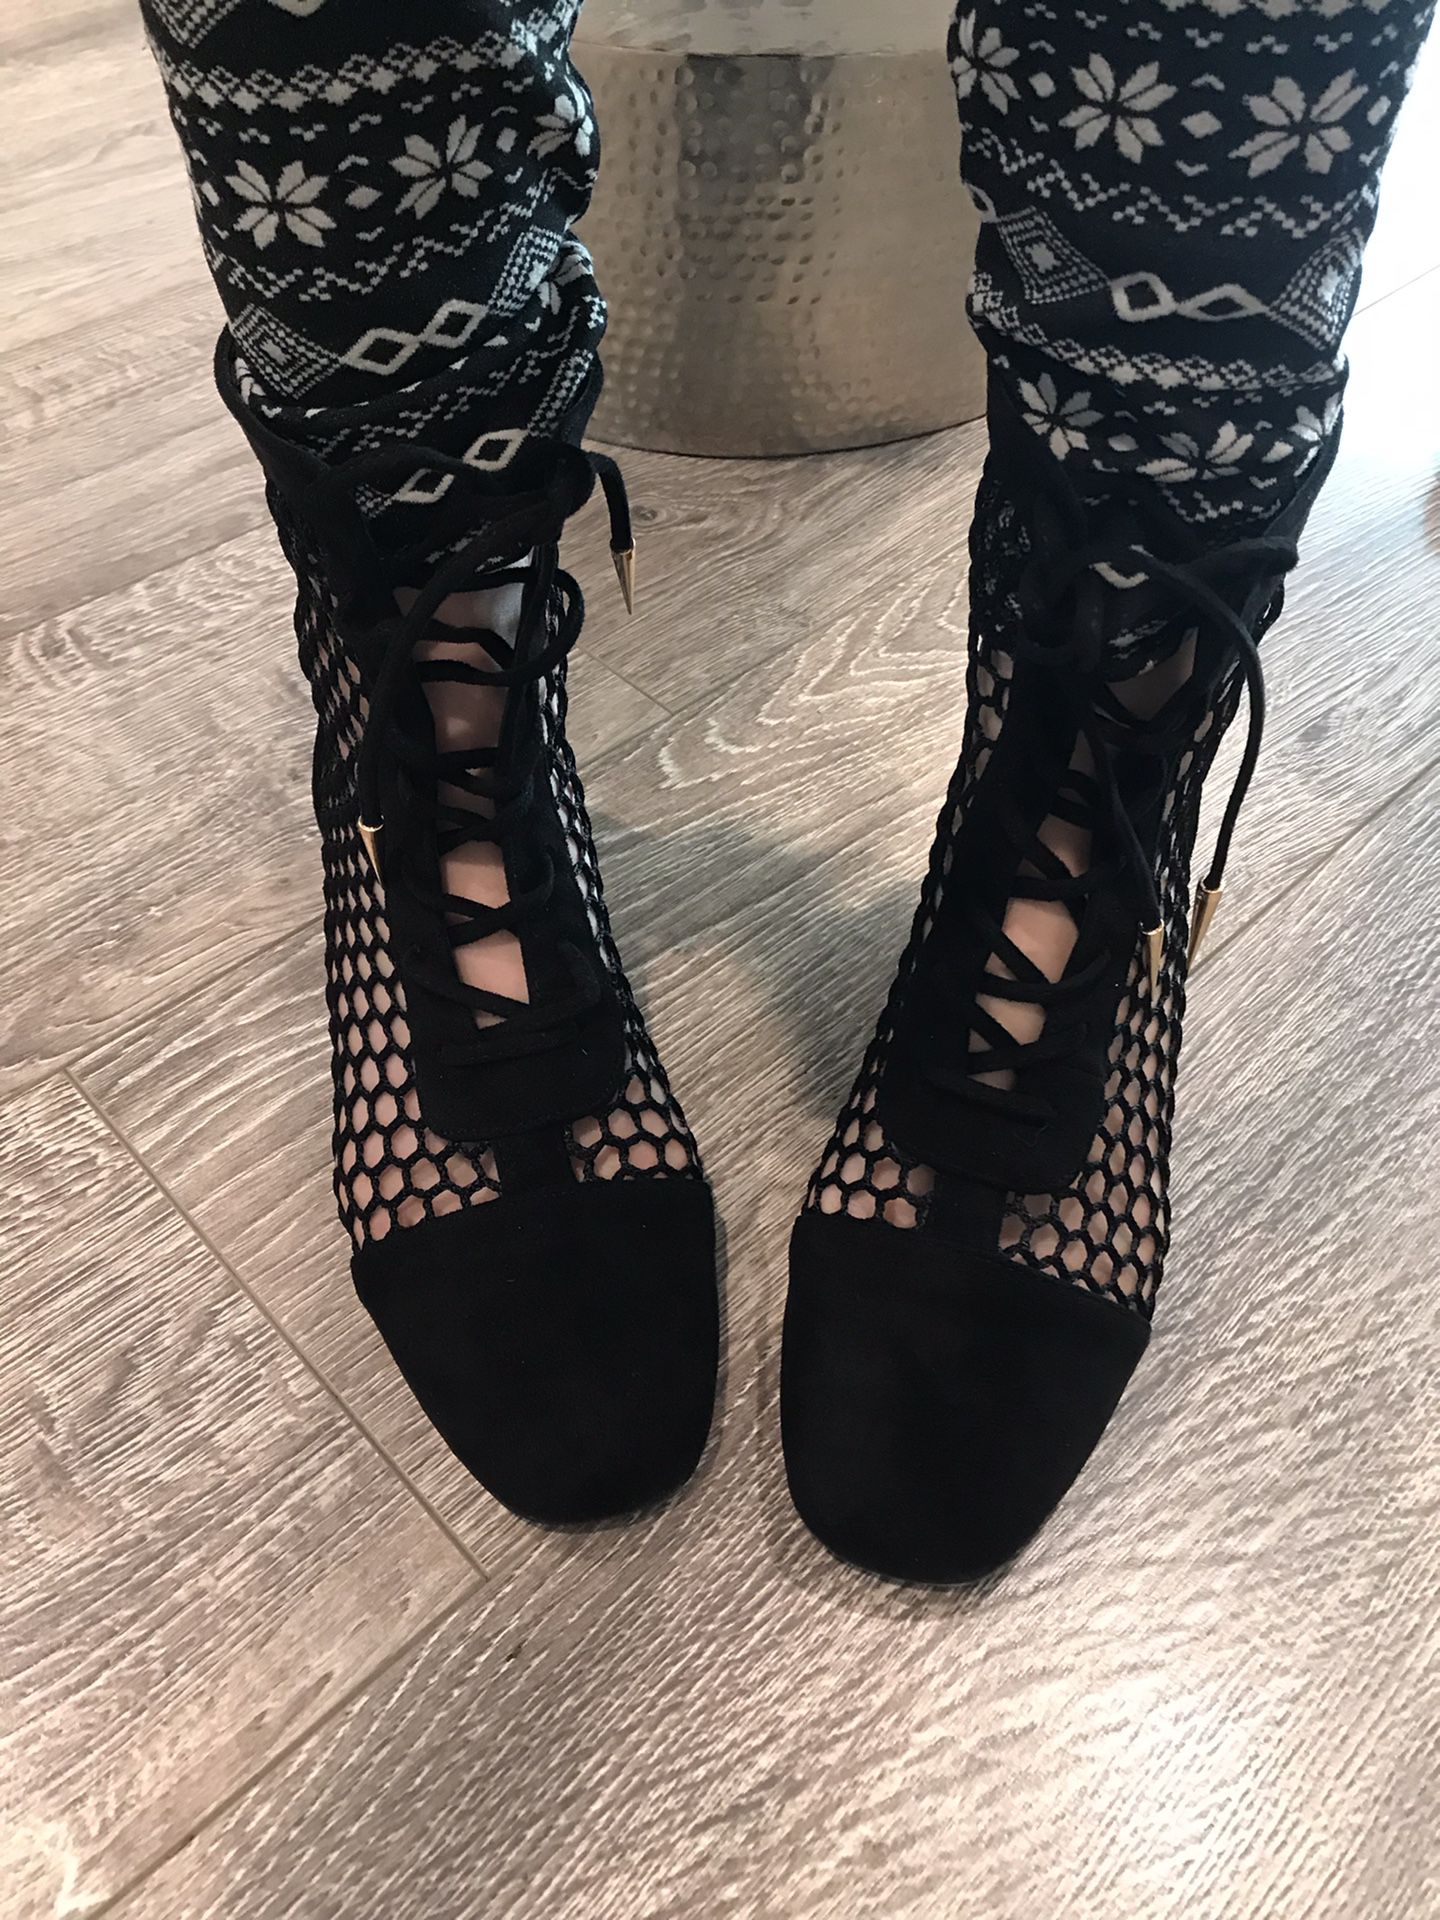 Sexy Fishnet Boots Size 8.5 Or 9 